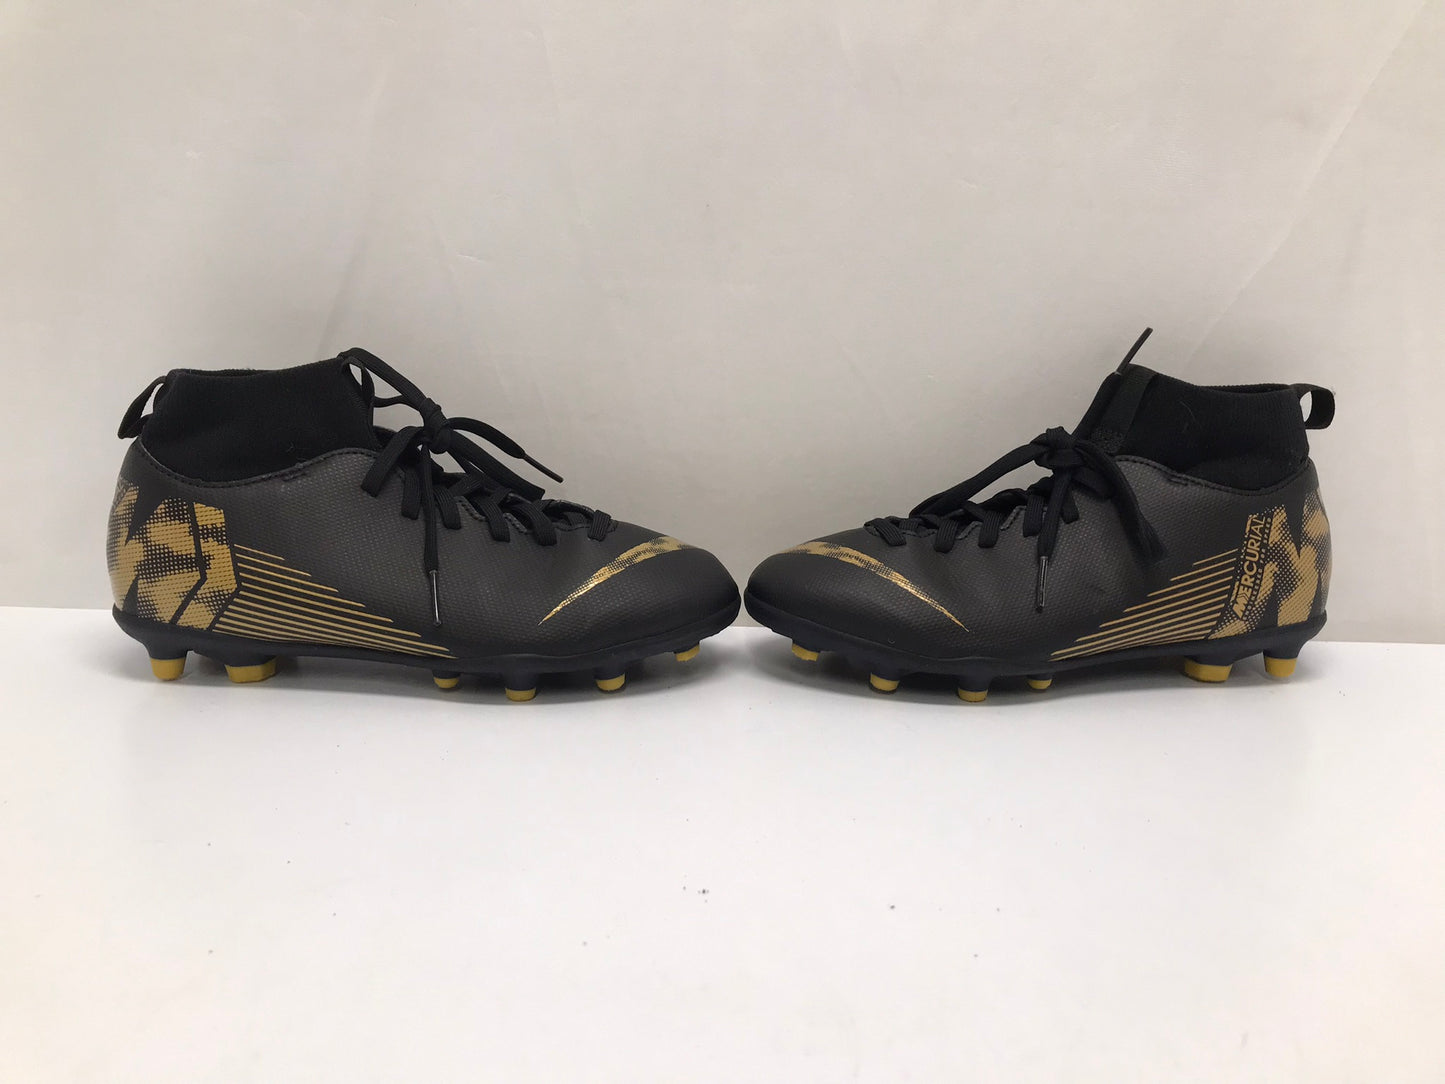 Soccer Shoes Cleats Child Size 4 Nike Mercurial Black Gold With Slipper Foot